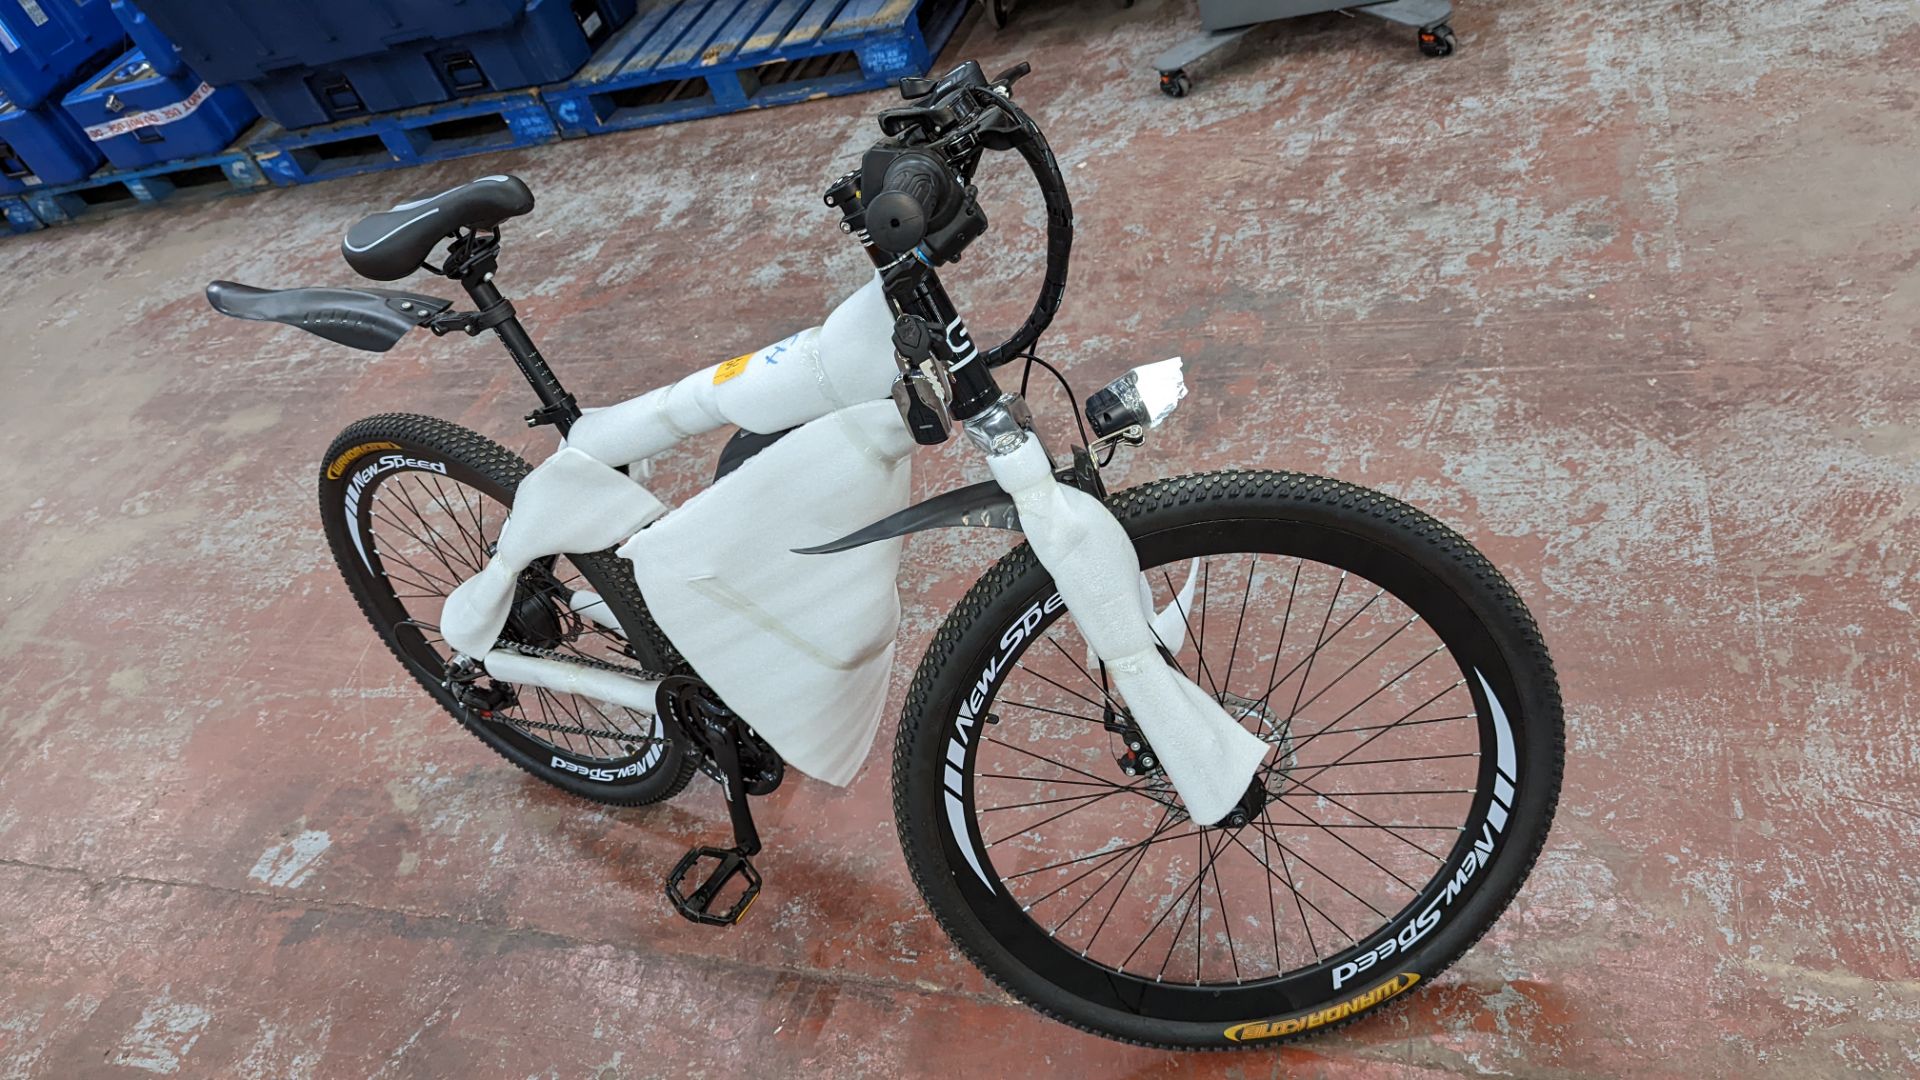 XSD FTX Sport MTB 7.5 Racing electric bike with Shimano Tourney TZ gears. Includes 36v 12AH battery, - Image 6 of 18